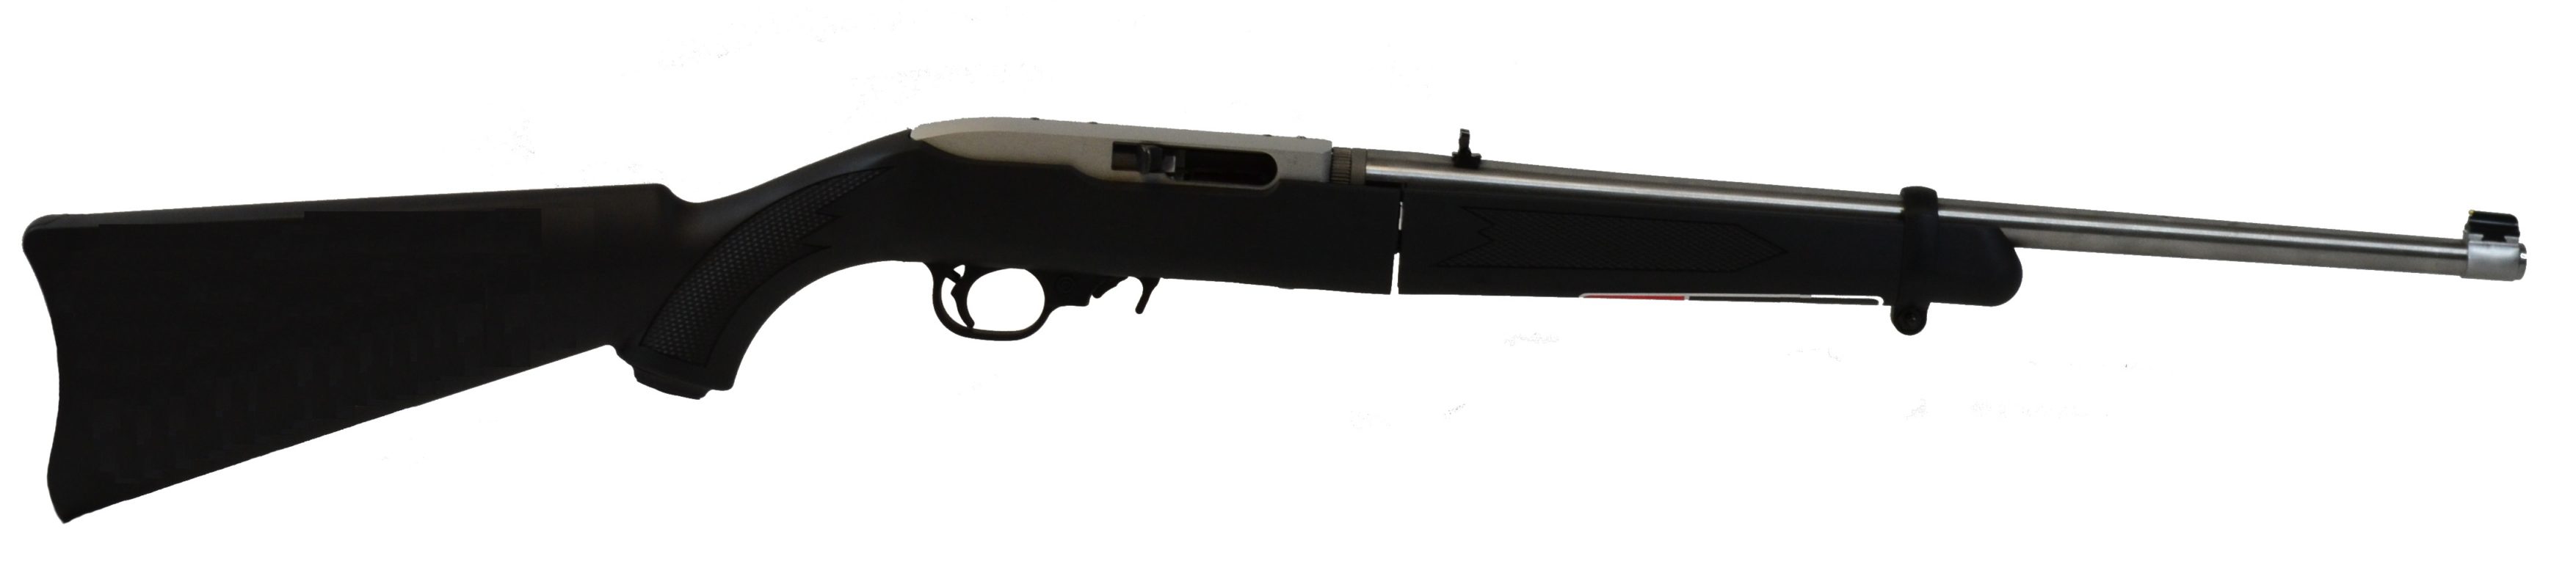 RUGER 10/22 TAKEDOWN 50TH ANNIVERSARY .22LR RIFLE